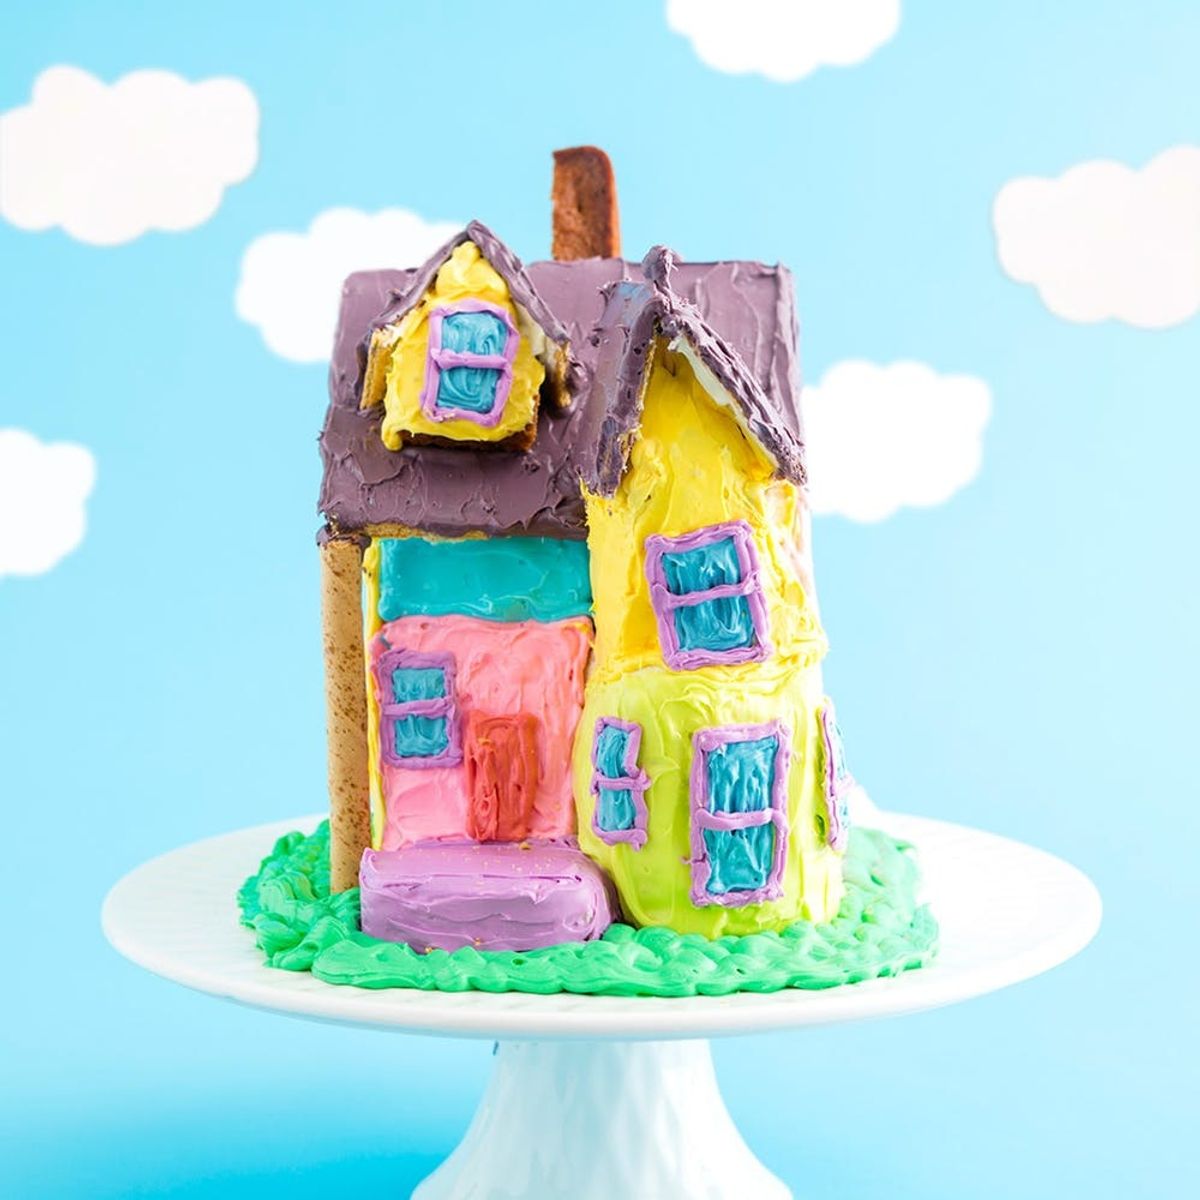 Make This Up-Inspired Gingerbread Cake House to Fulfill All Your Pixar Dreams